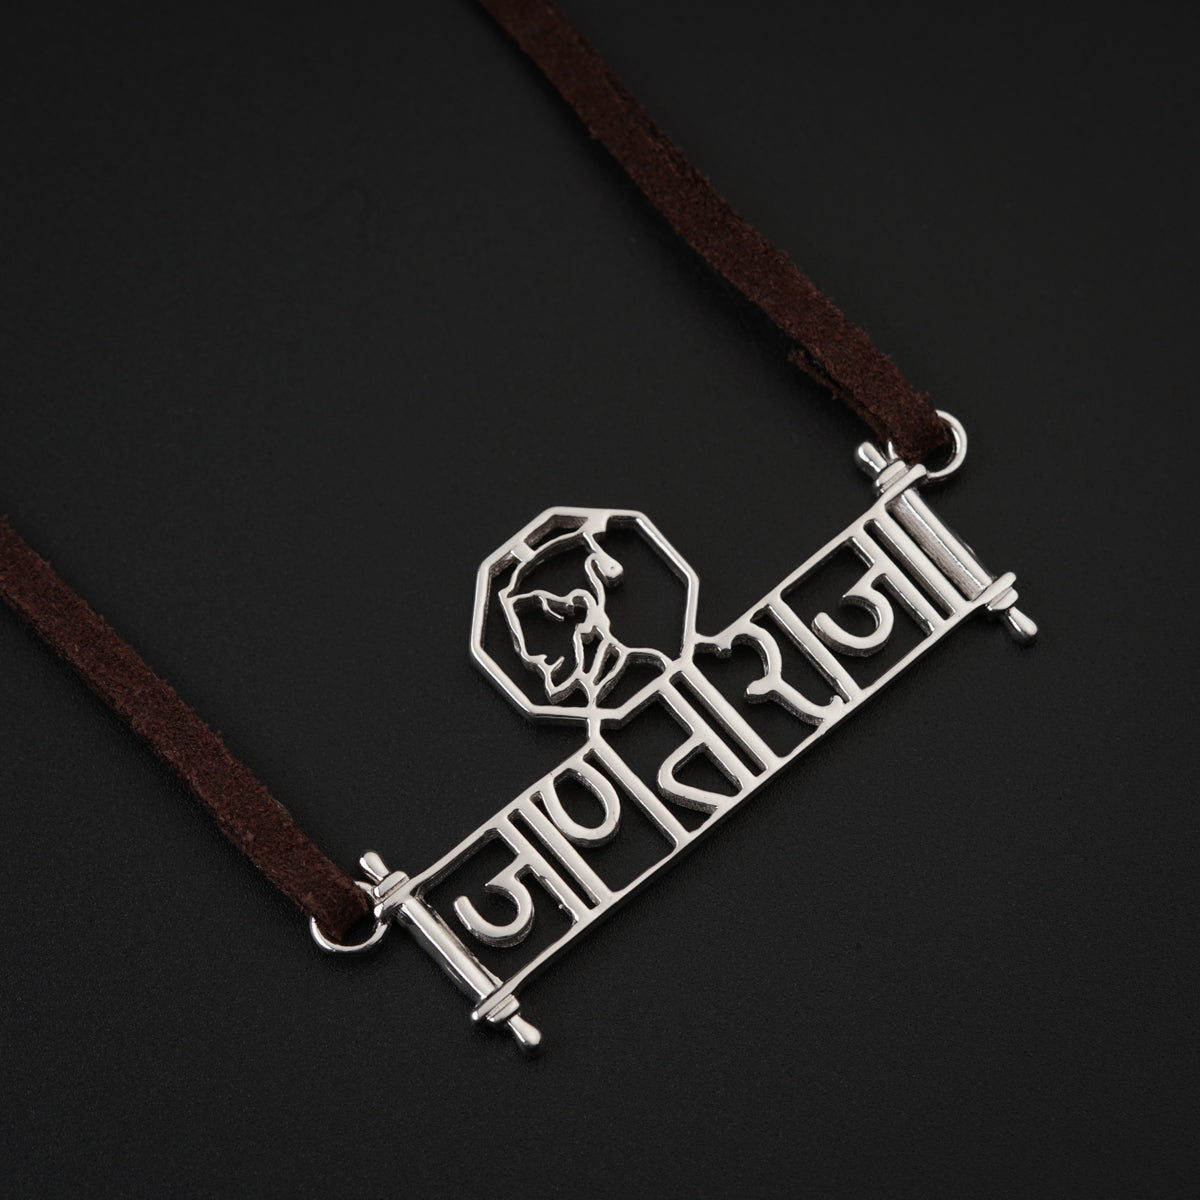 Jaanta Raja (जानतराजा) Silver Necklace with Suede Cord